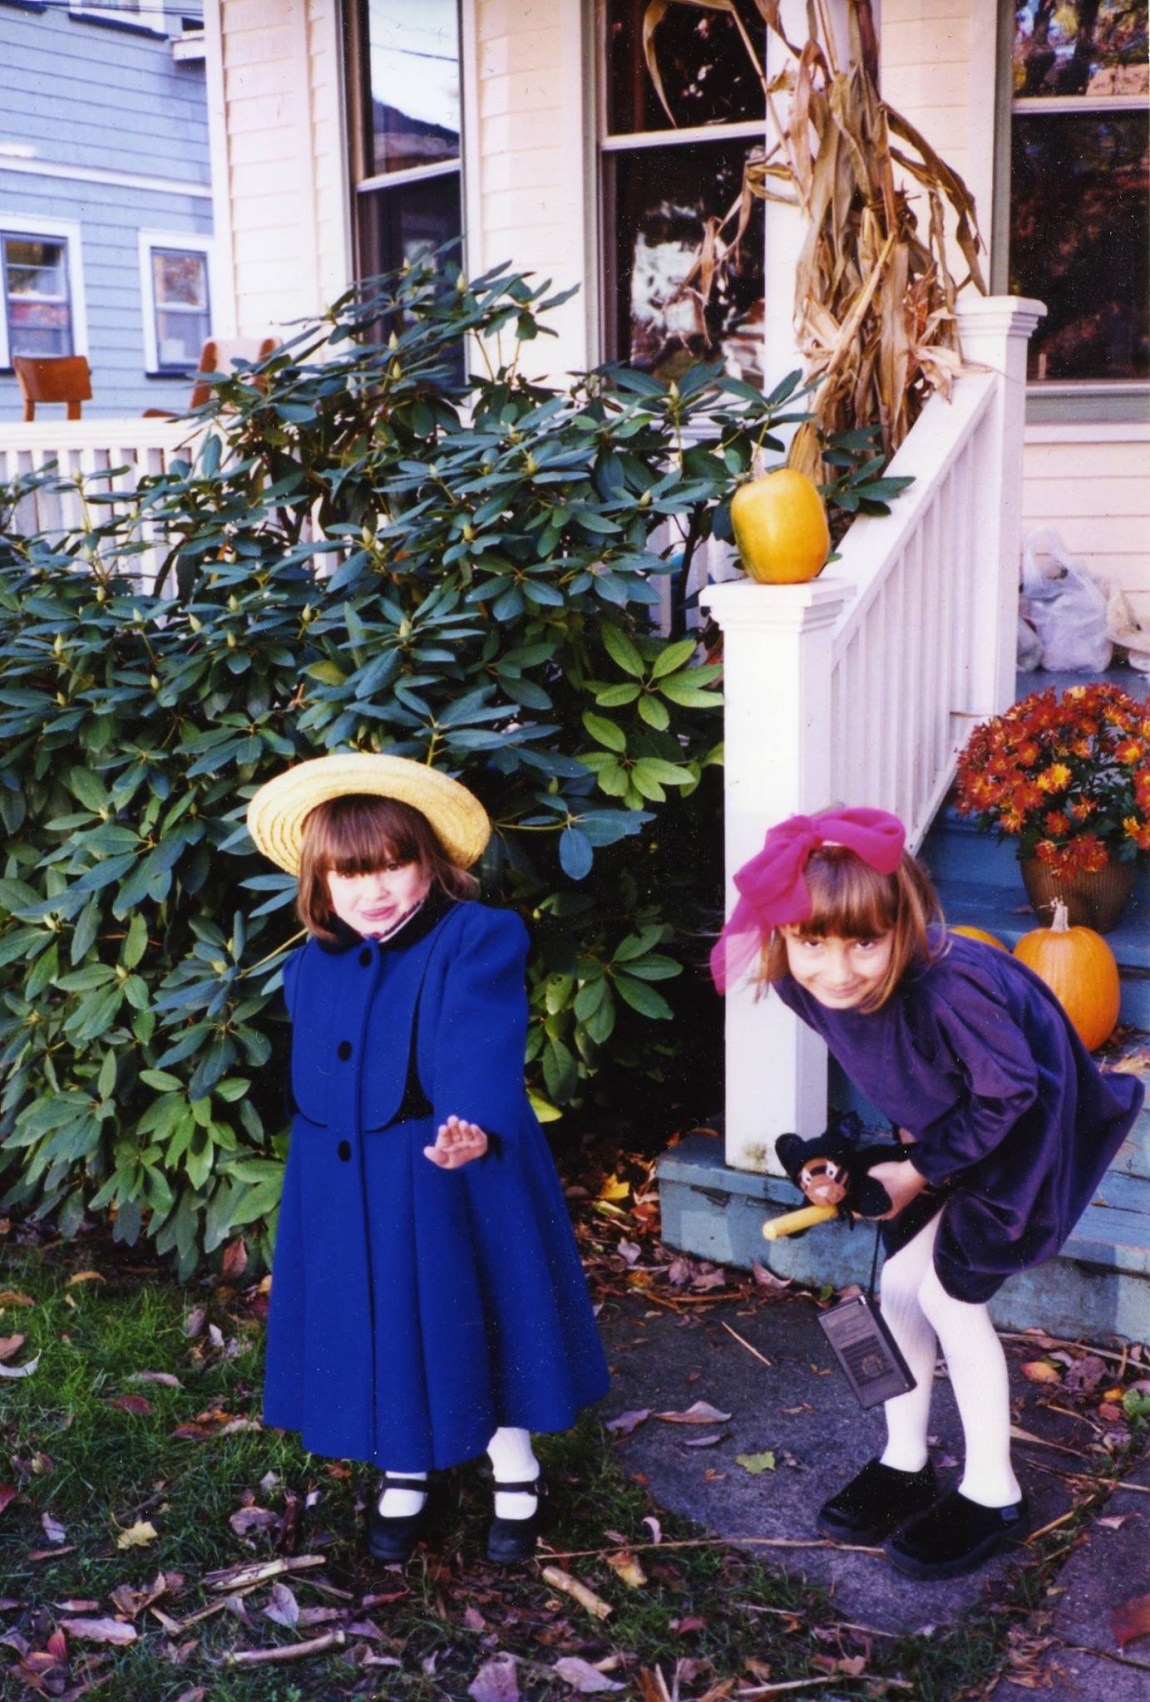 Two girls, age three and age six, dressed for Halloween as Ludwig Bemelman's Madeline and Kiki, the witch from the animated film Kiki's Delivery Service